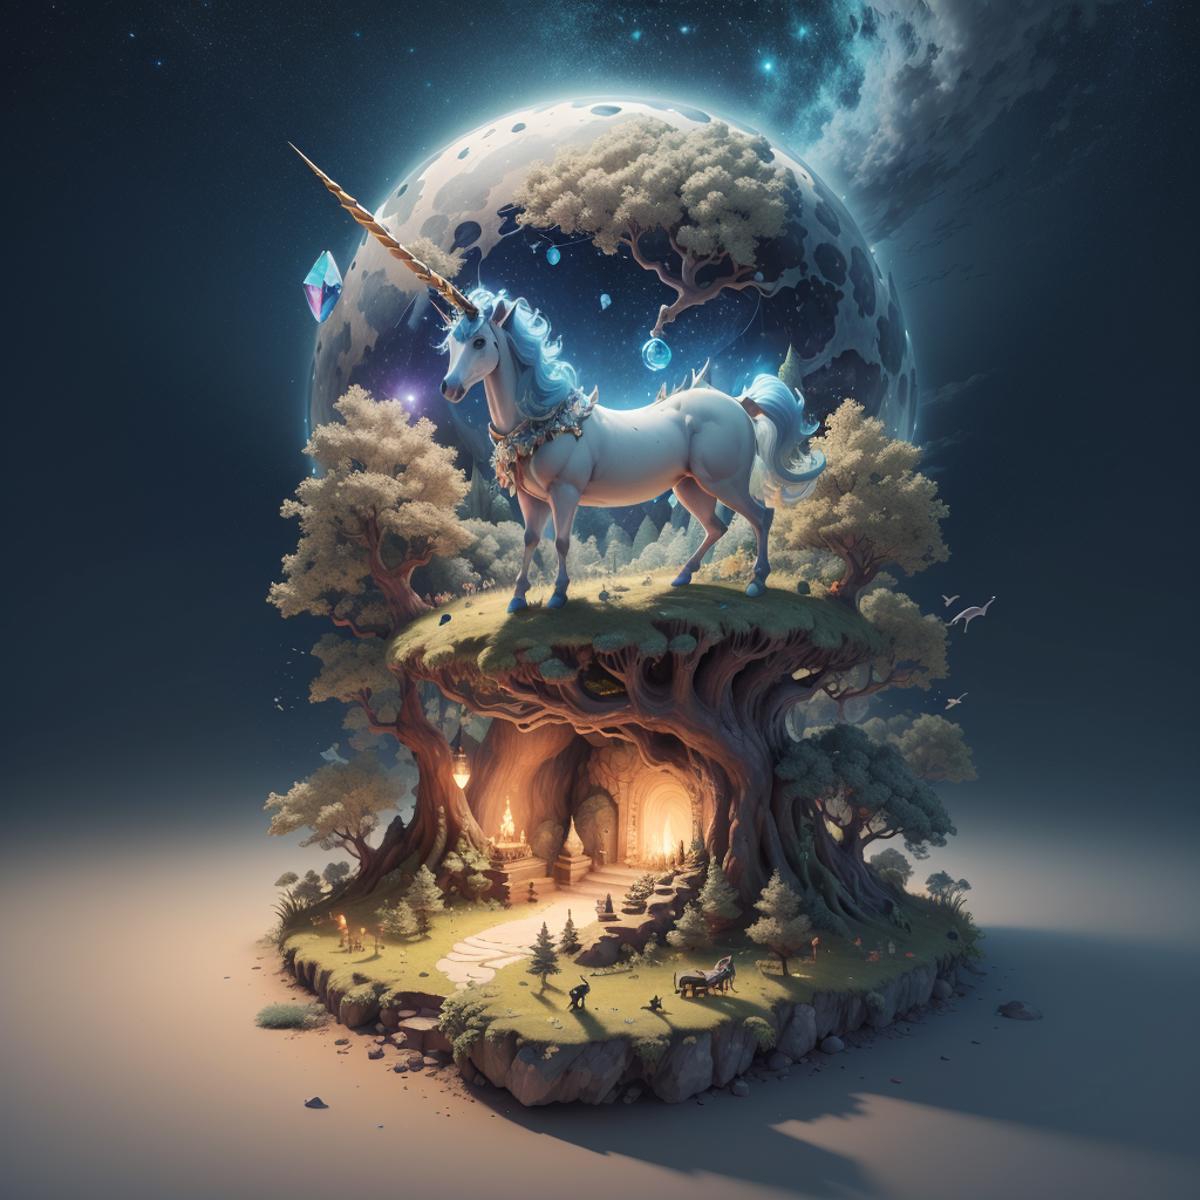 A fantasy scene with a unicorn, a moon, and a forest.